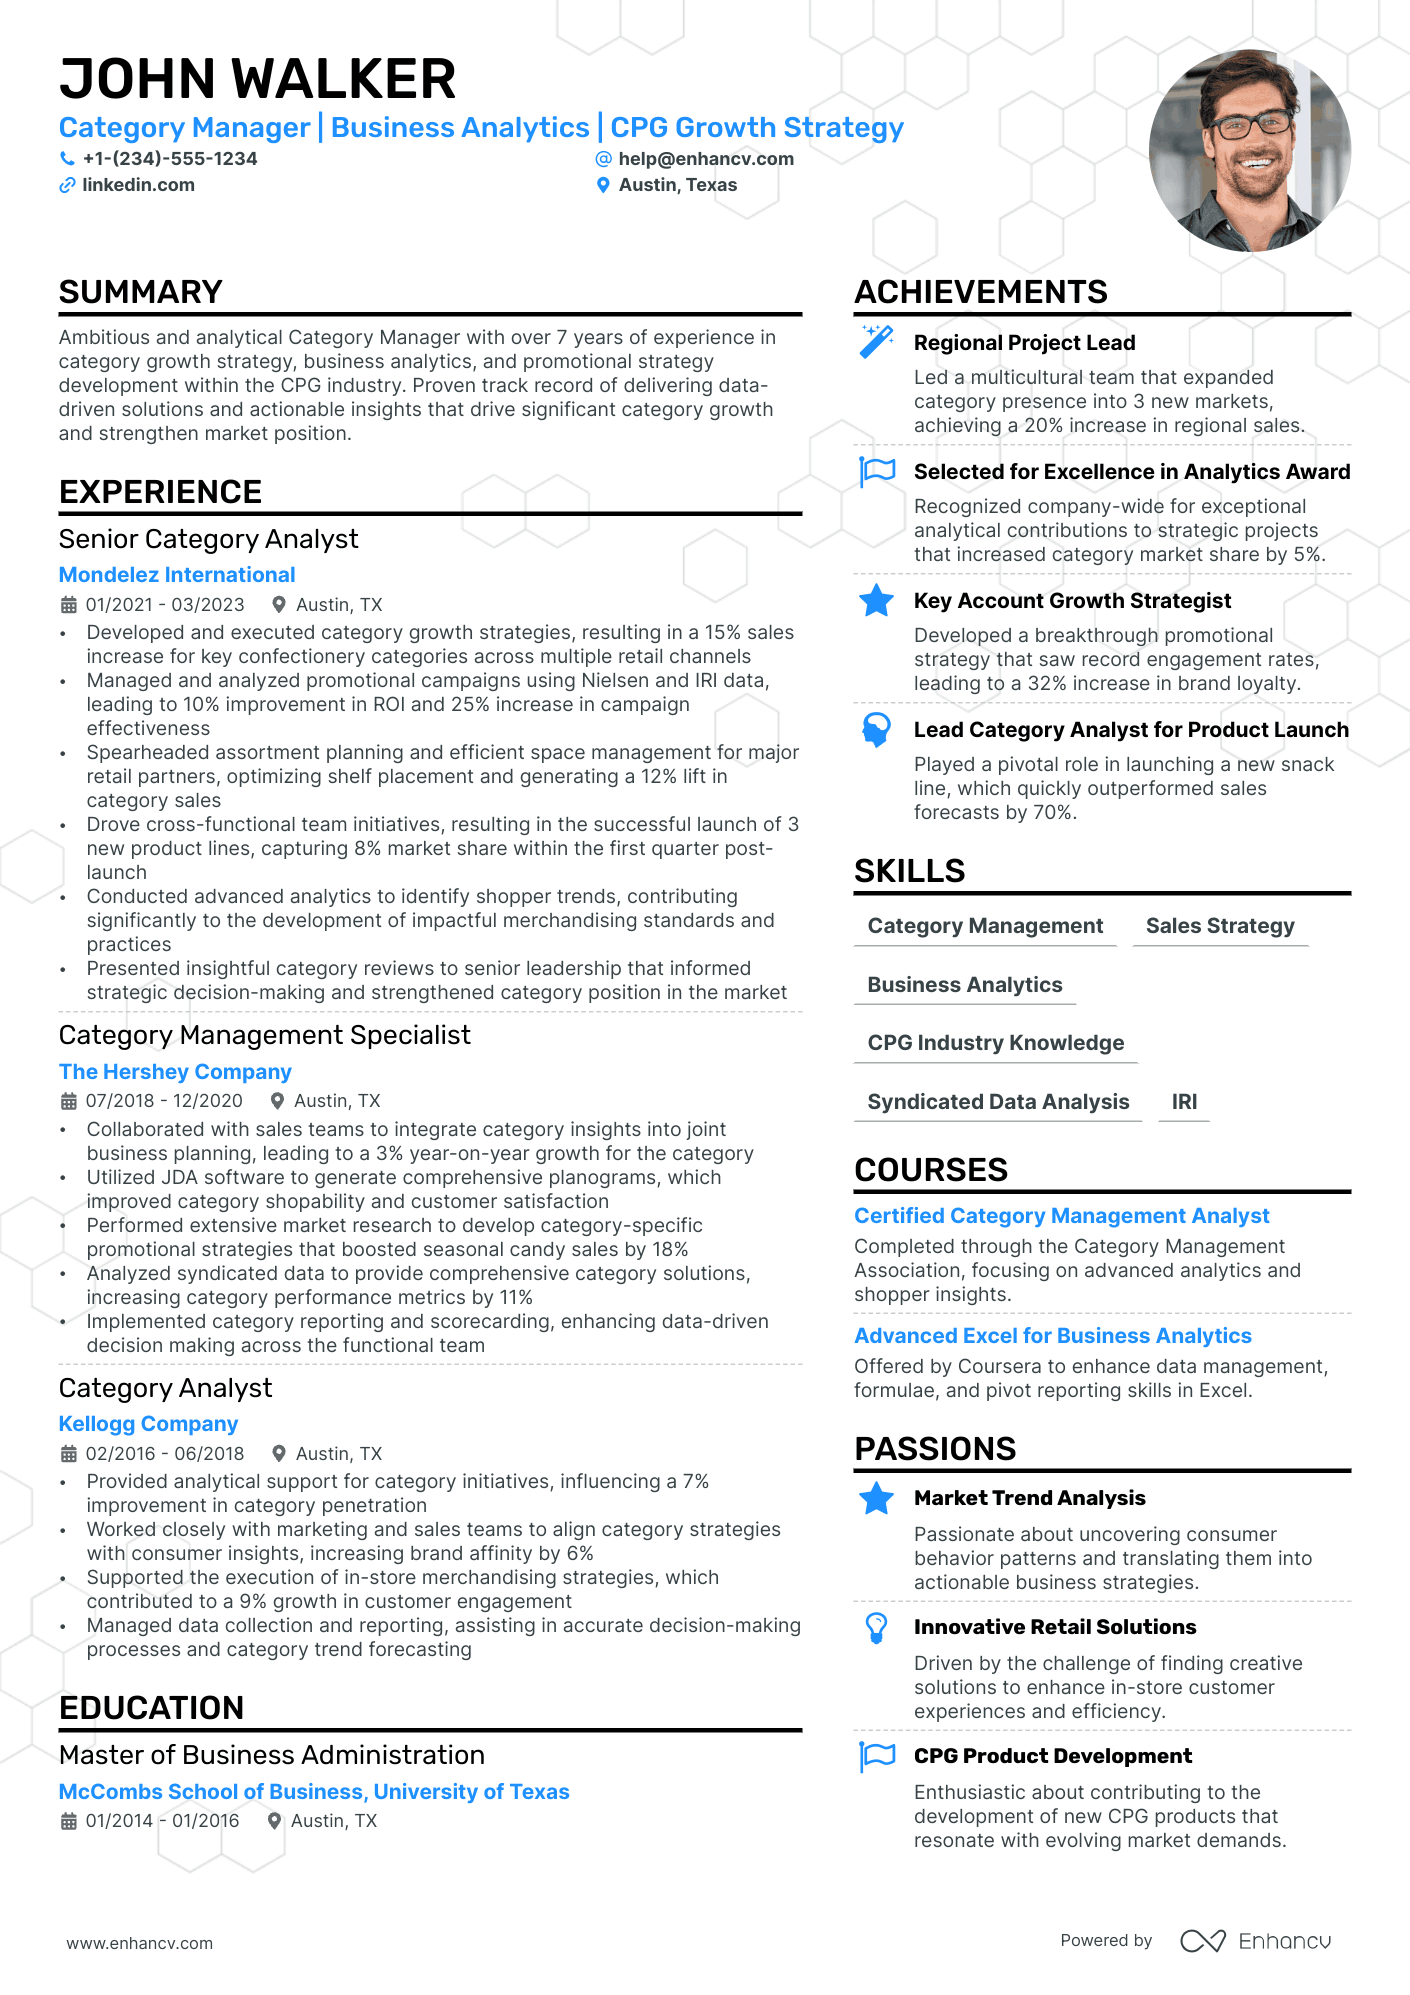 Category Manager resume example